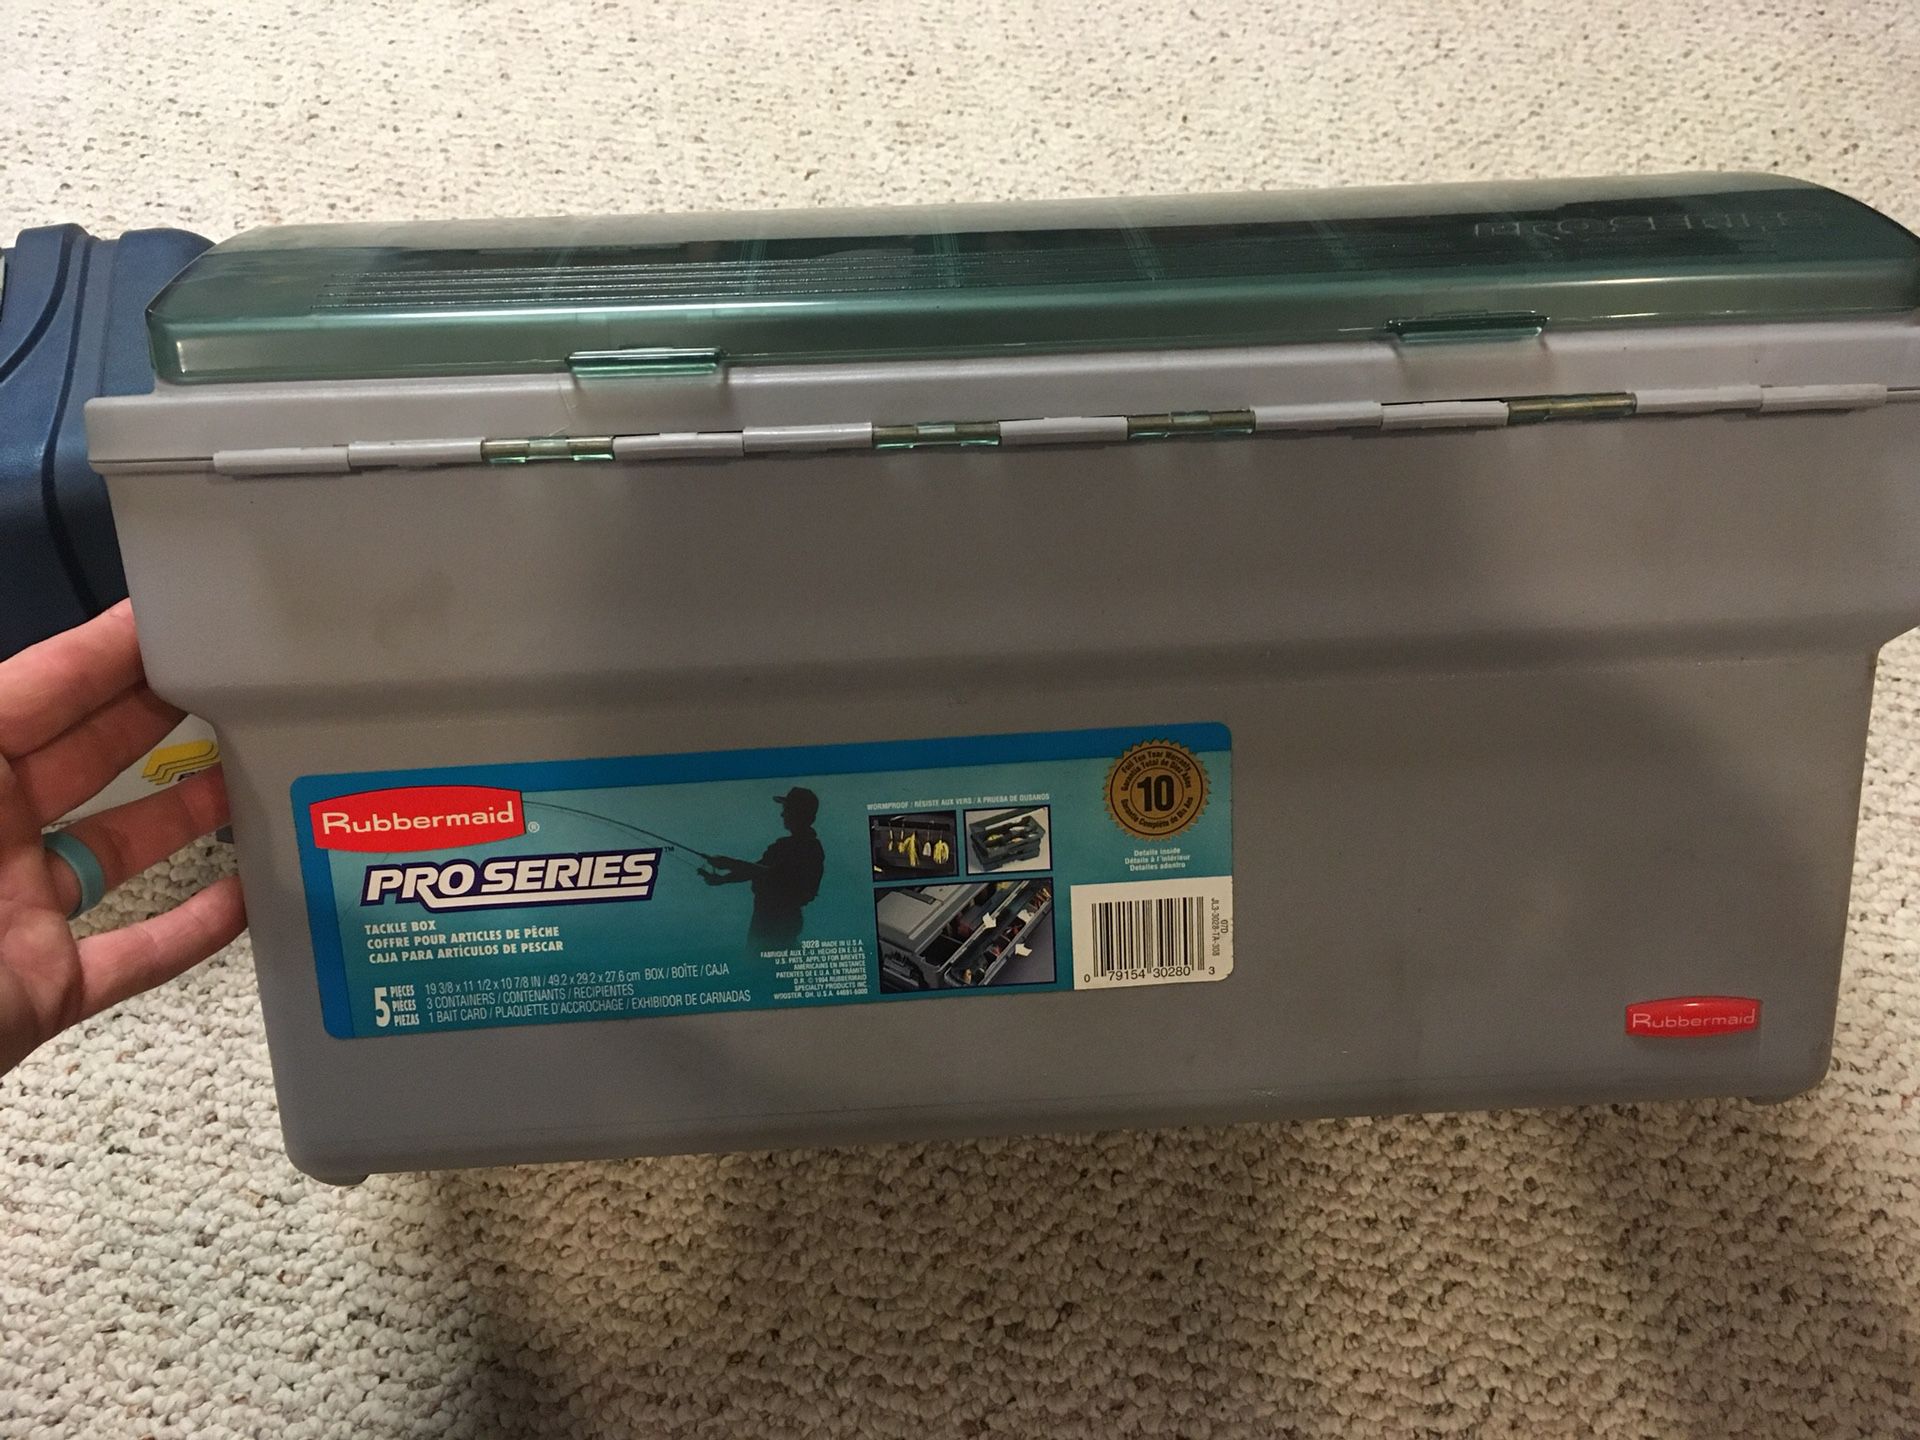 Large Rubbermaid Tackle Box - Brand New for Sale in Valencia, PA